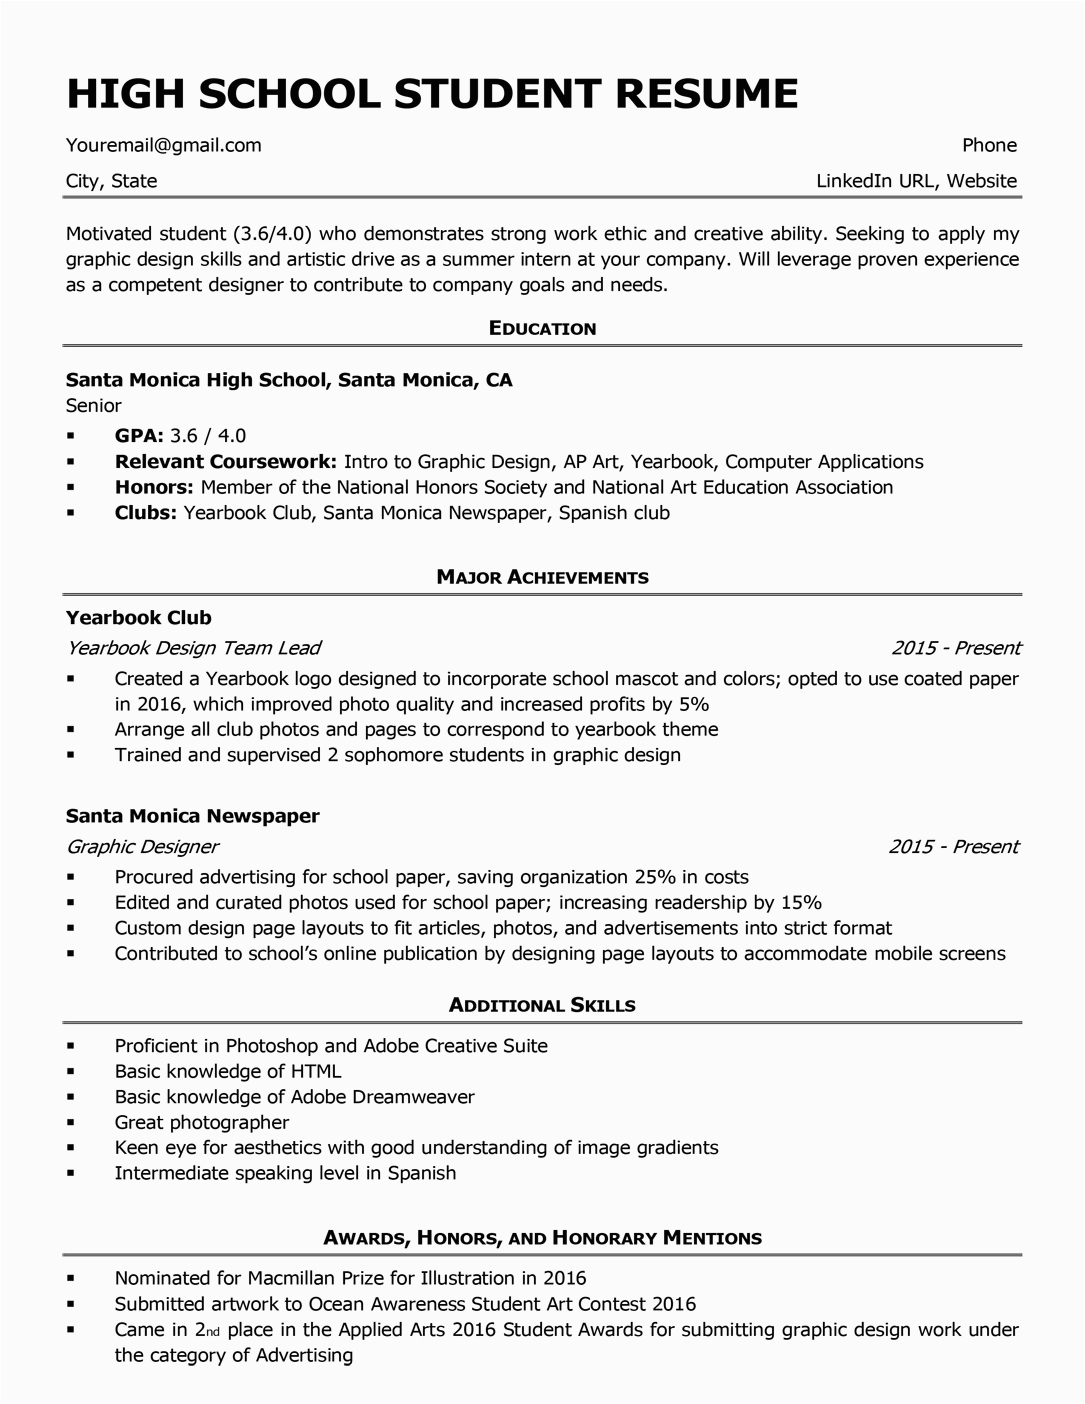 Easy Resume Template for High School Students High School Resume Template & Writing Tips